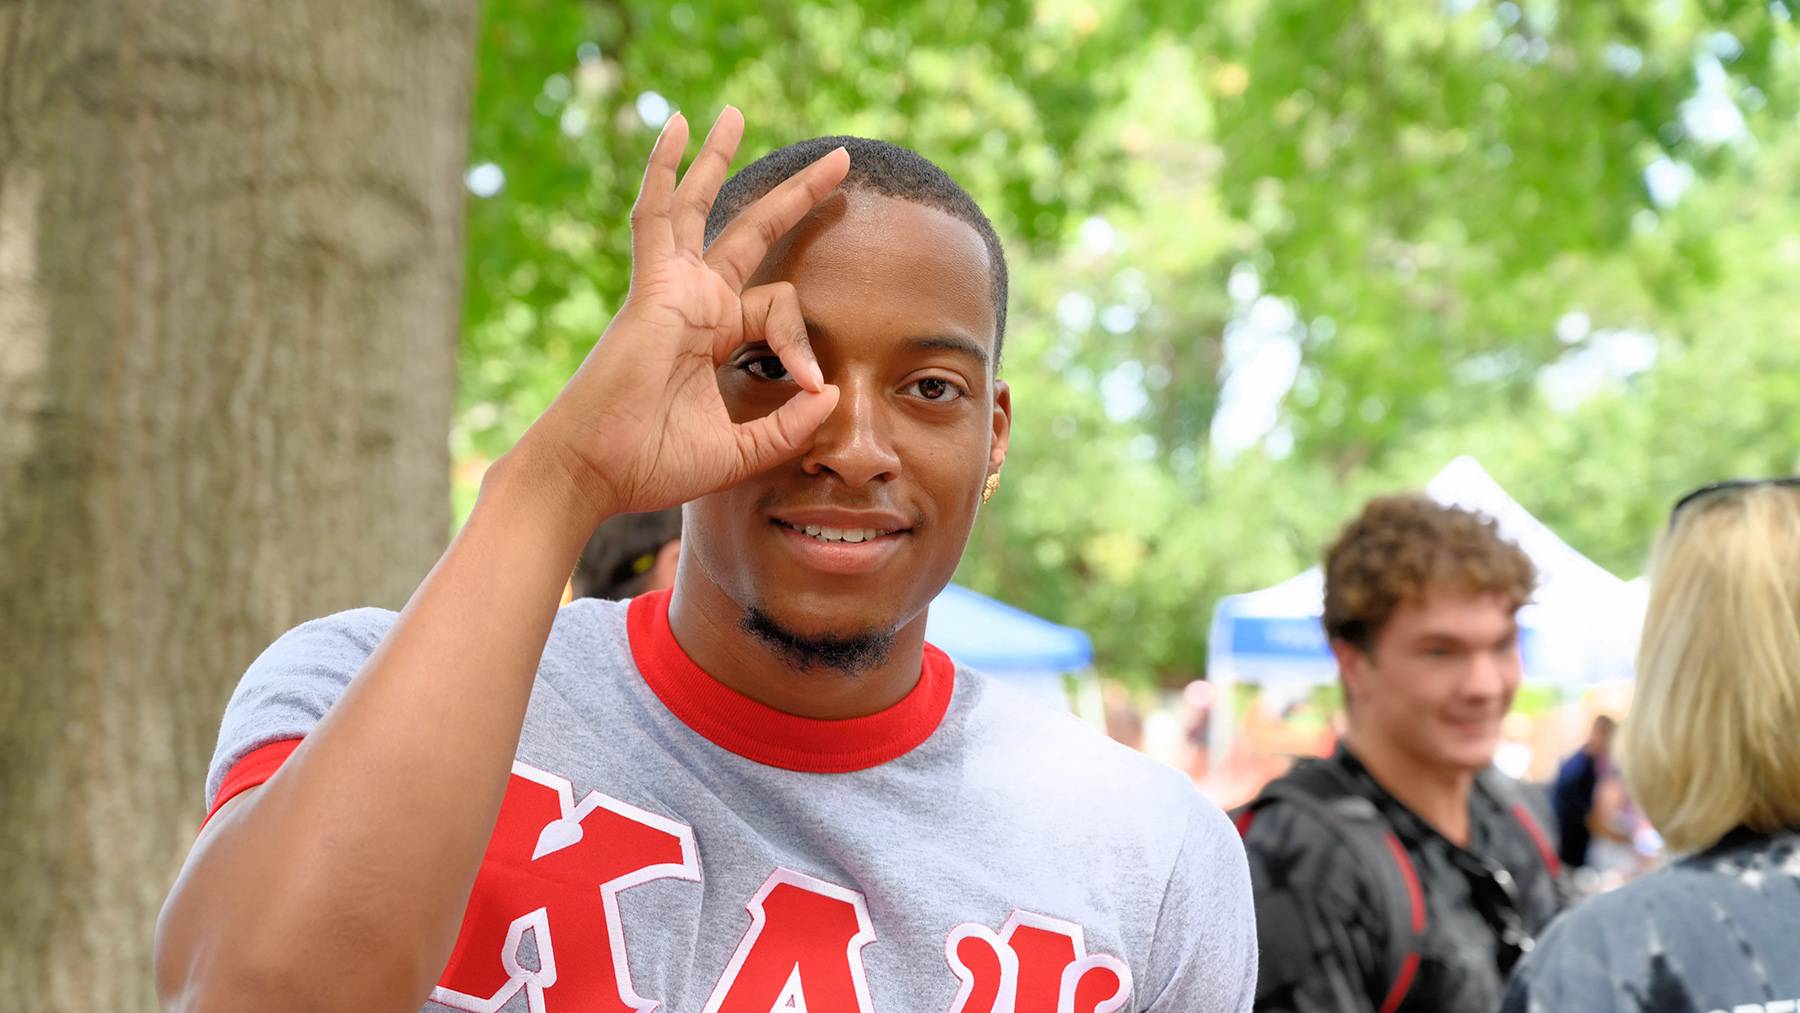 A Kappa Alpha Psi fraternity member poses for a picture.